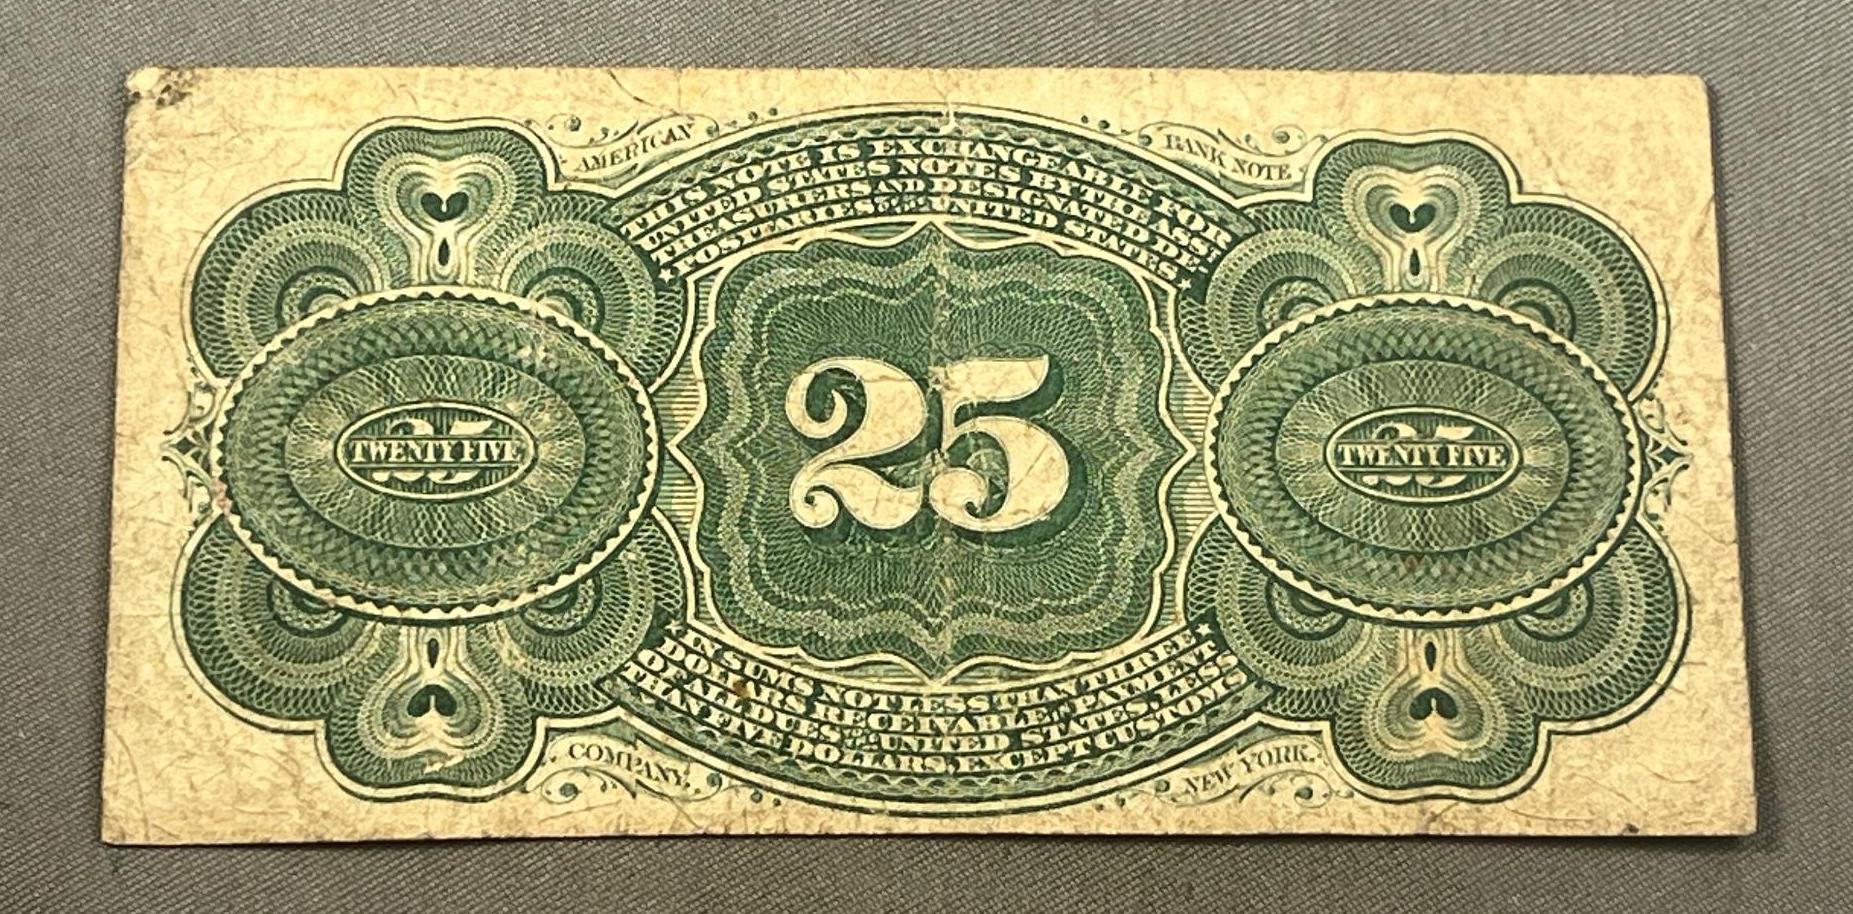 1863 25 Cent US Fractional Currency Note, Civil War Era